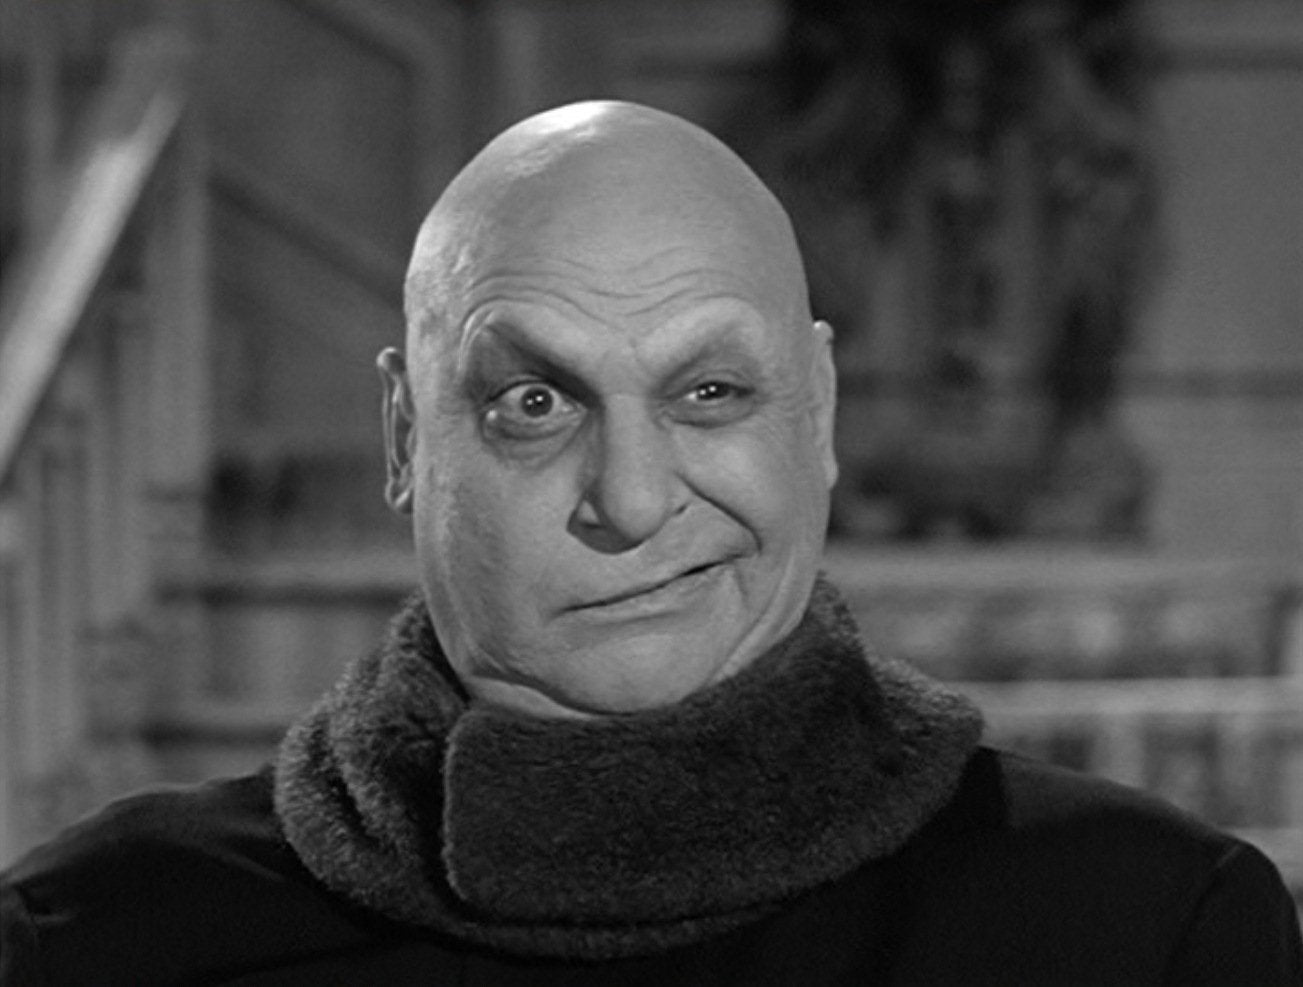 How Uncle Fester helped raise more than $1 million for Armenian Genocide Victims